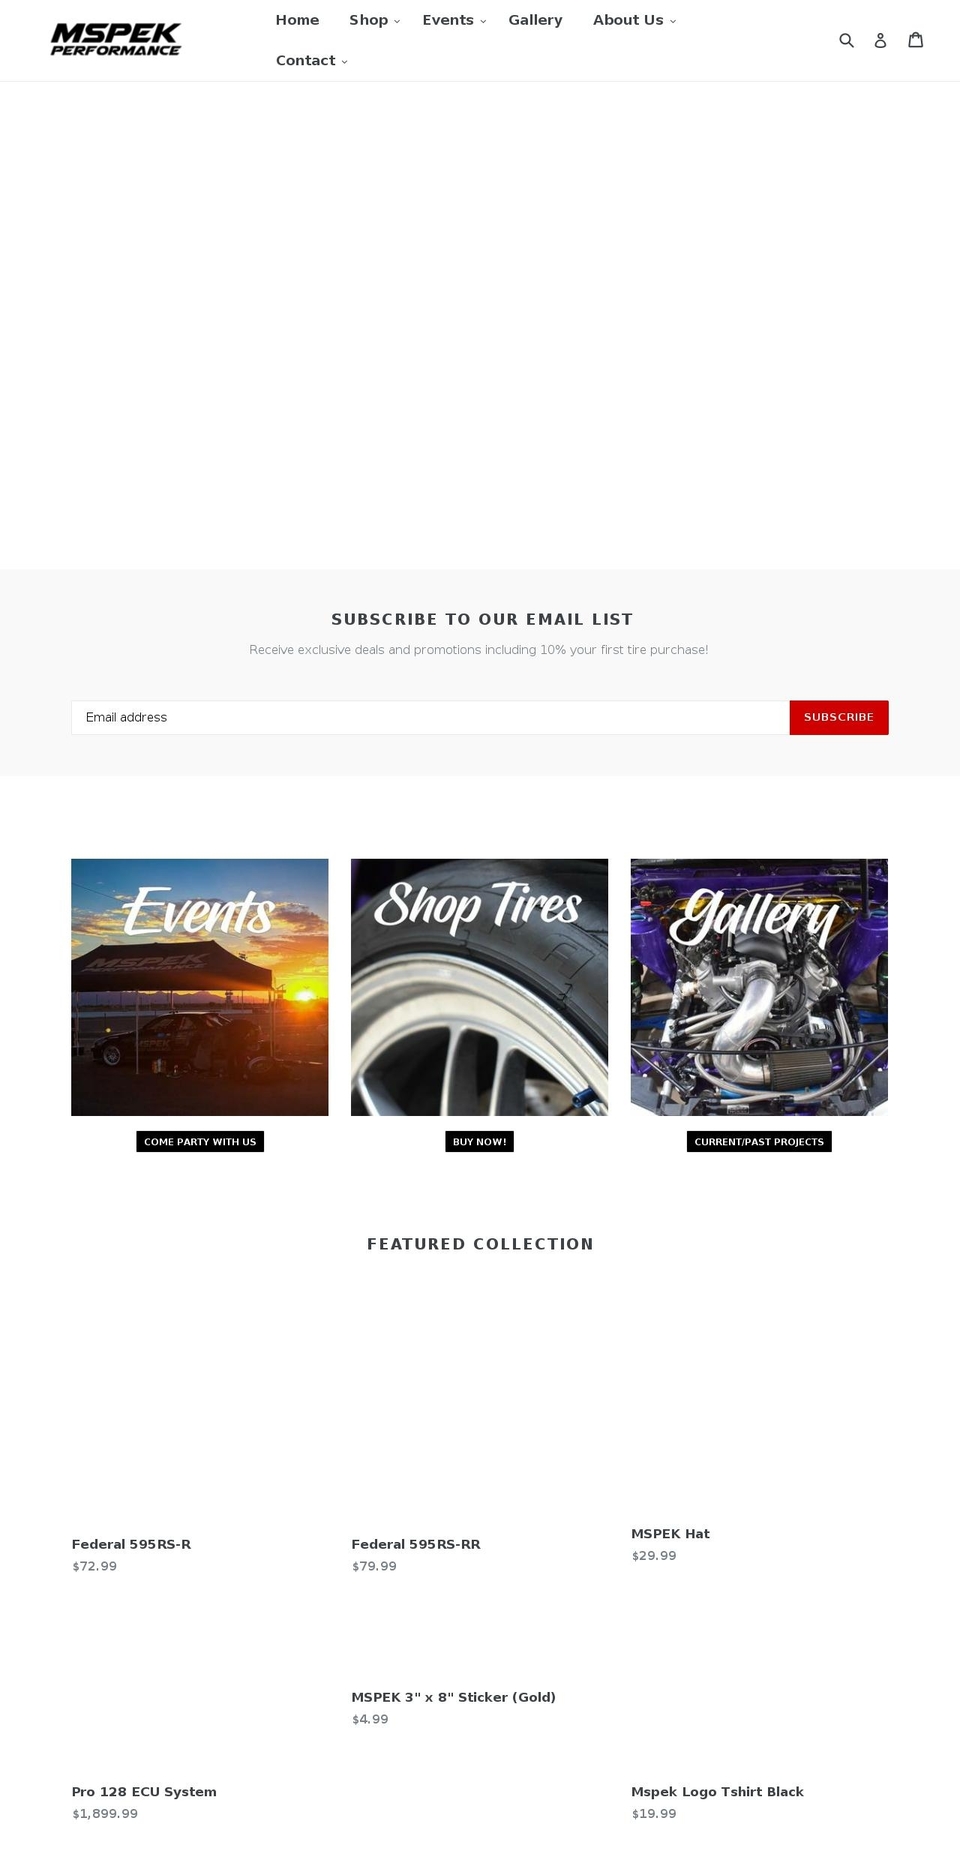 Ride with Installments message Shopify theme site example mspek.com